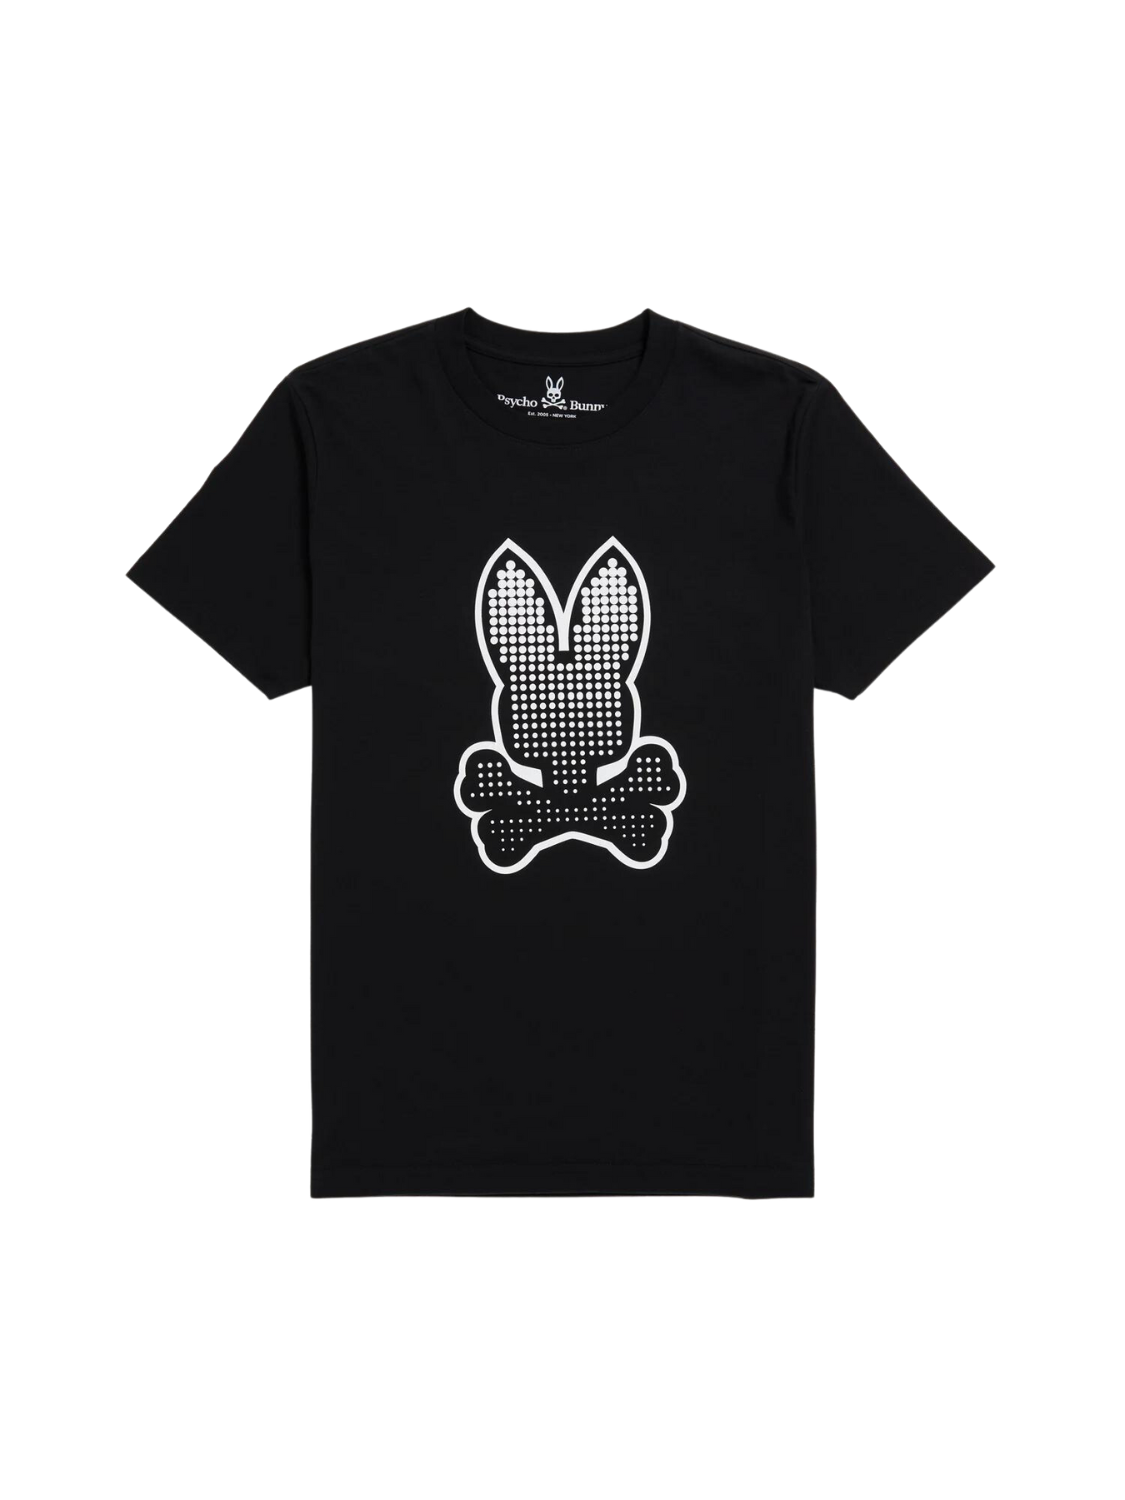 men's Strype graphic tee features an eye-catching Bunny graphic